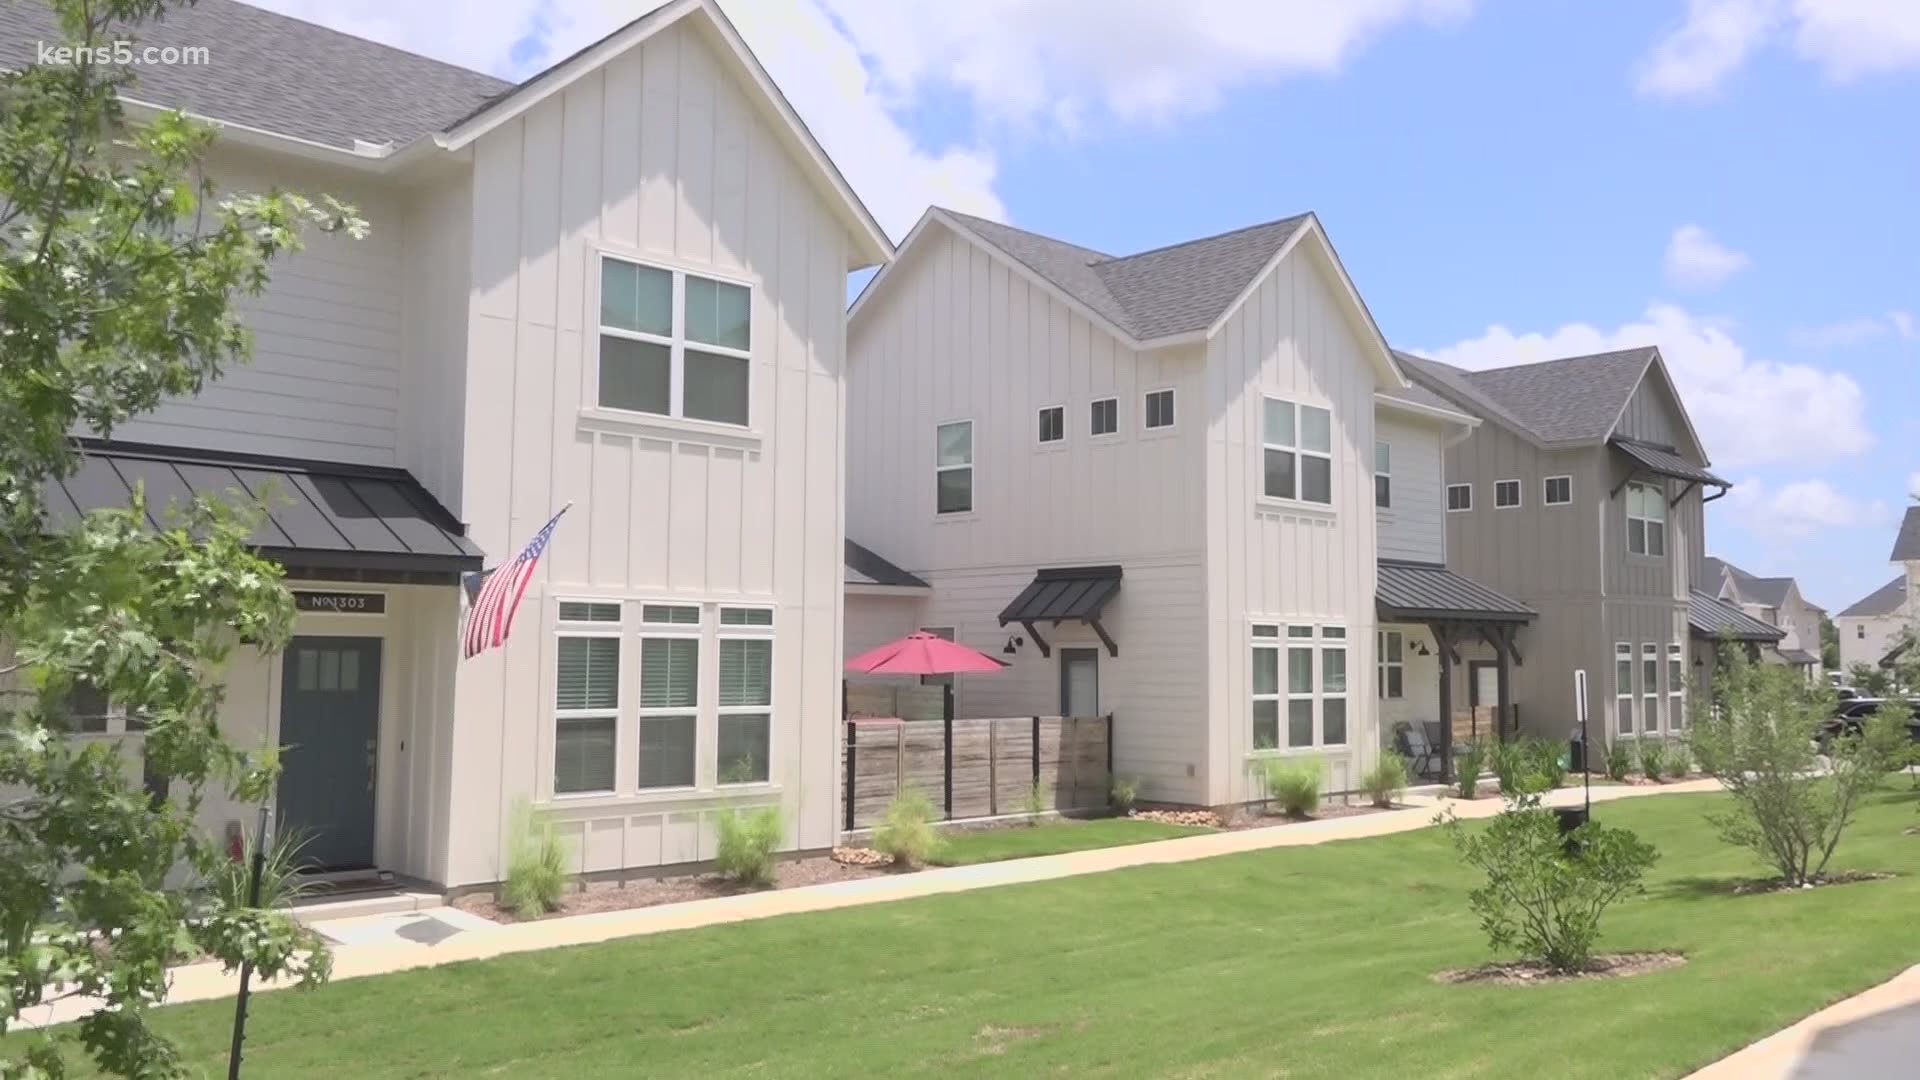 The National Association of Home Builders says build-to-rent properties are growing in popularity.